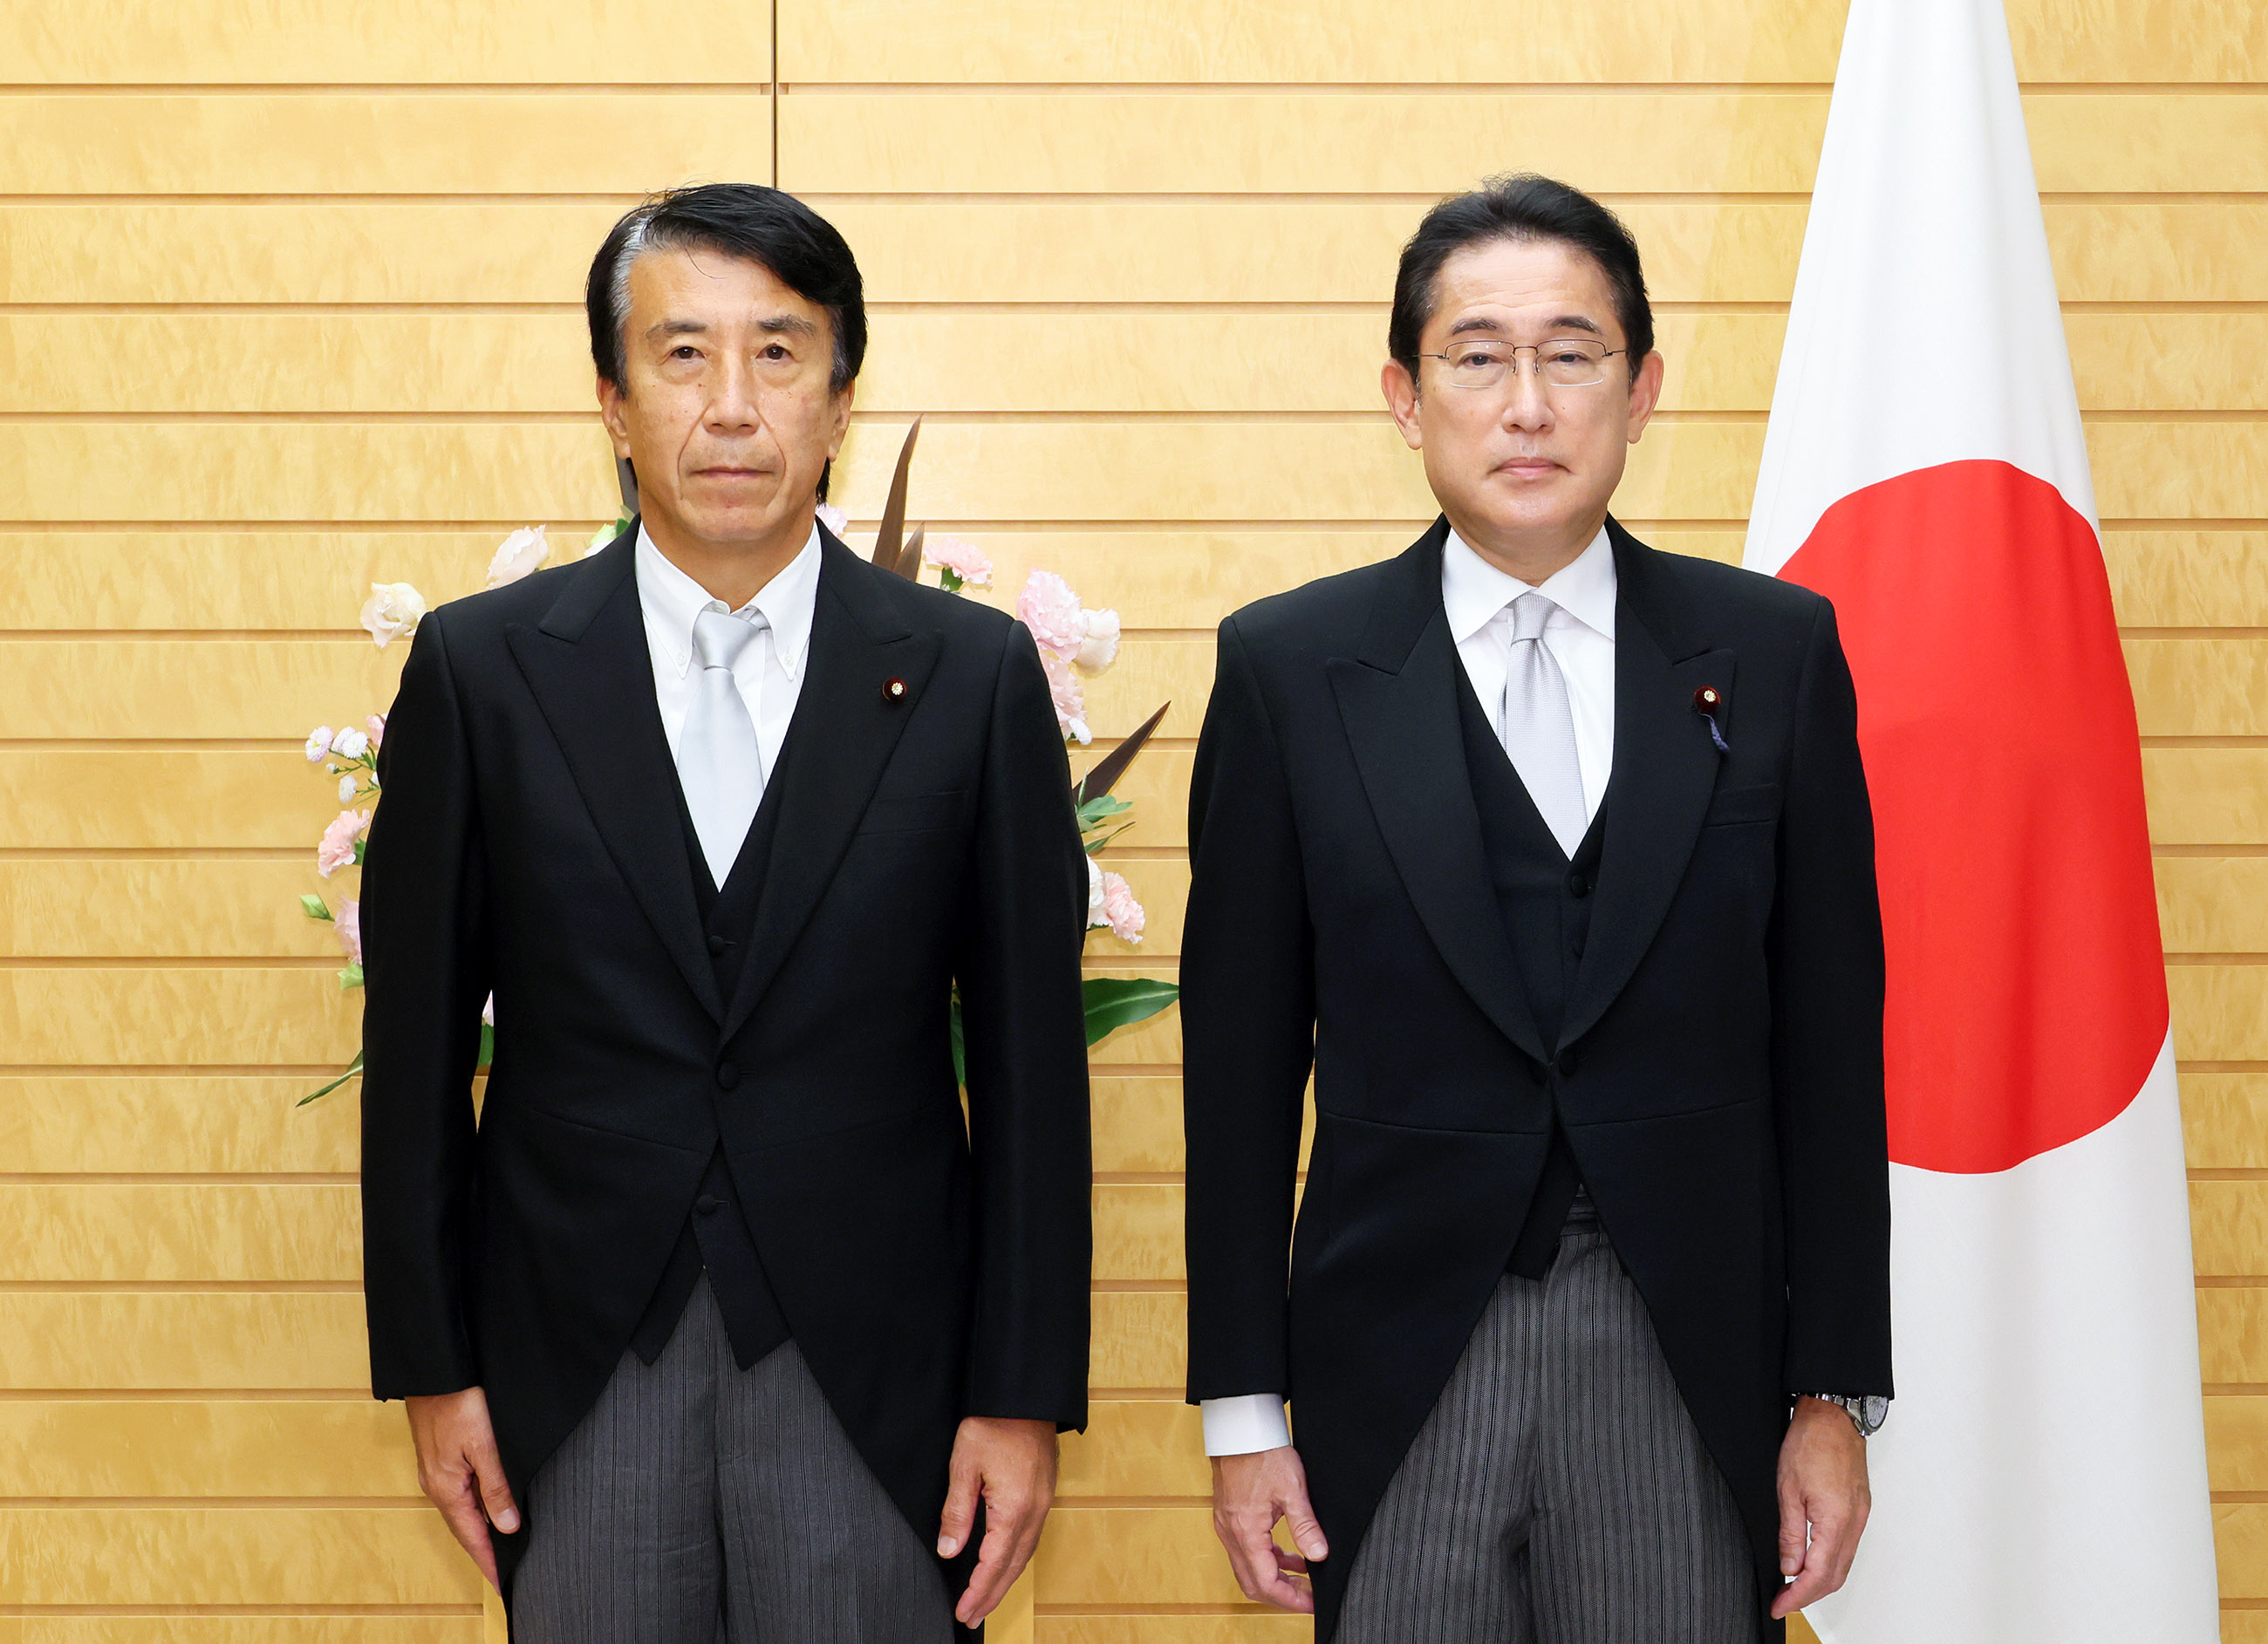 Photograph of the Prime Minister attending a photograph session with Minister Saito (1)